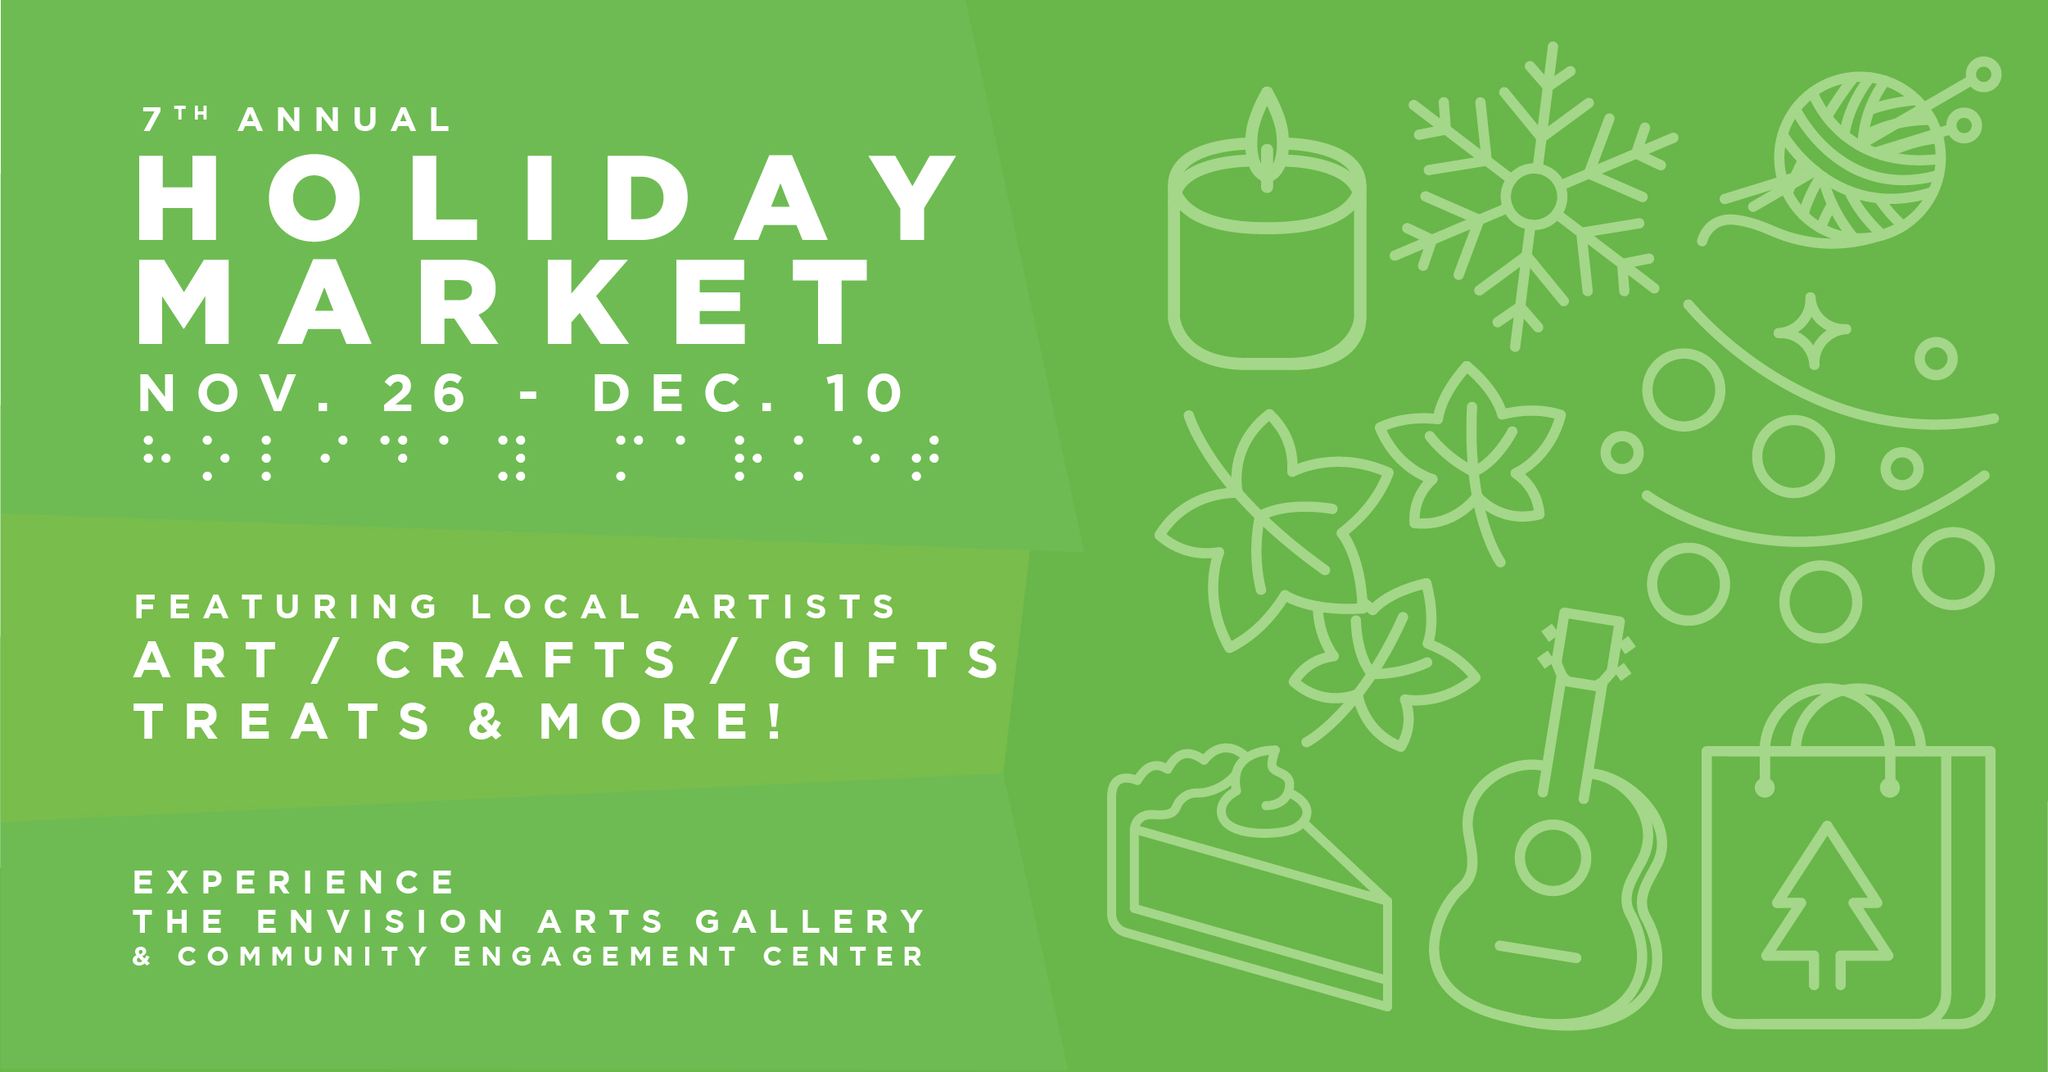 7th Annual Holiday Market Nov 26-Dec 10. Featuring Local Artists - Arts/Crafts/Gifts/Treats and More! Experience the Envision Arts Gallery & Community Engagement Center